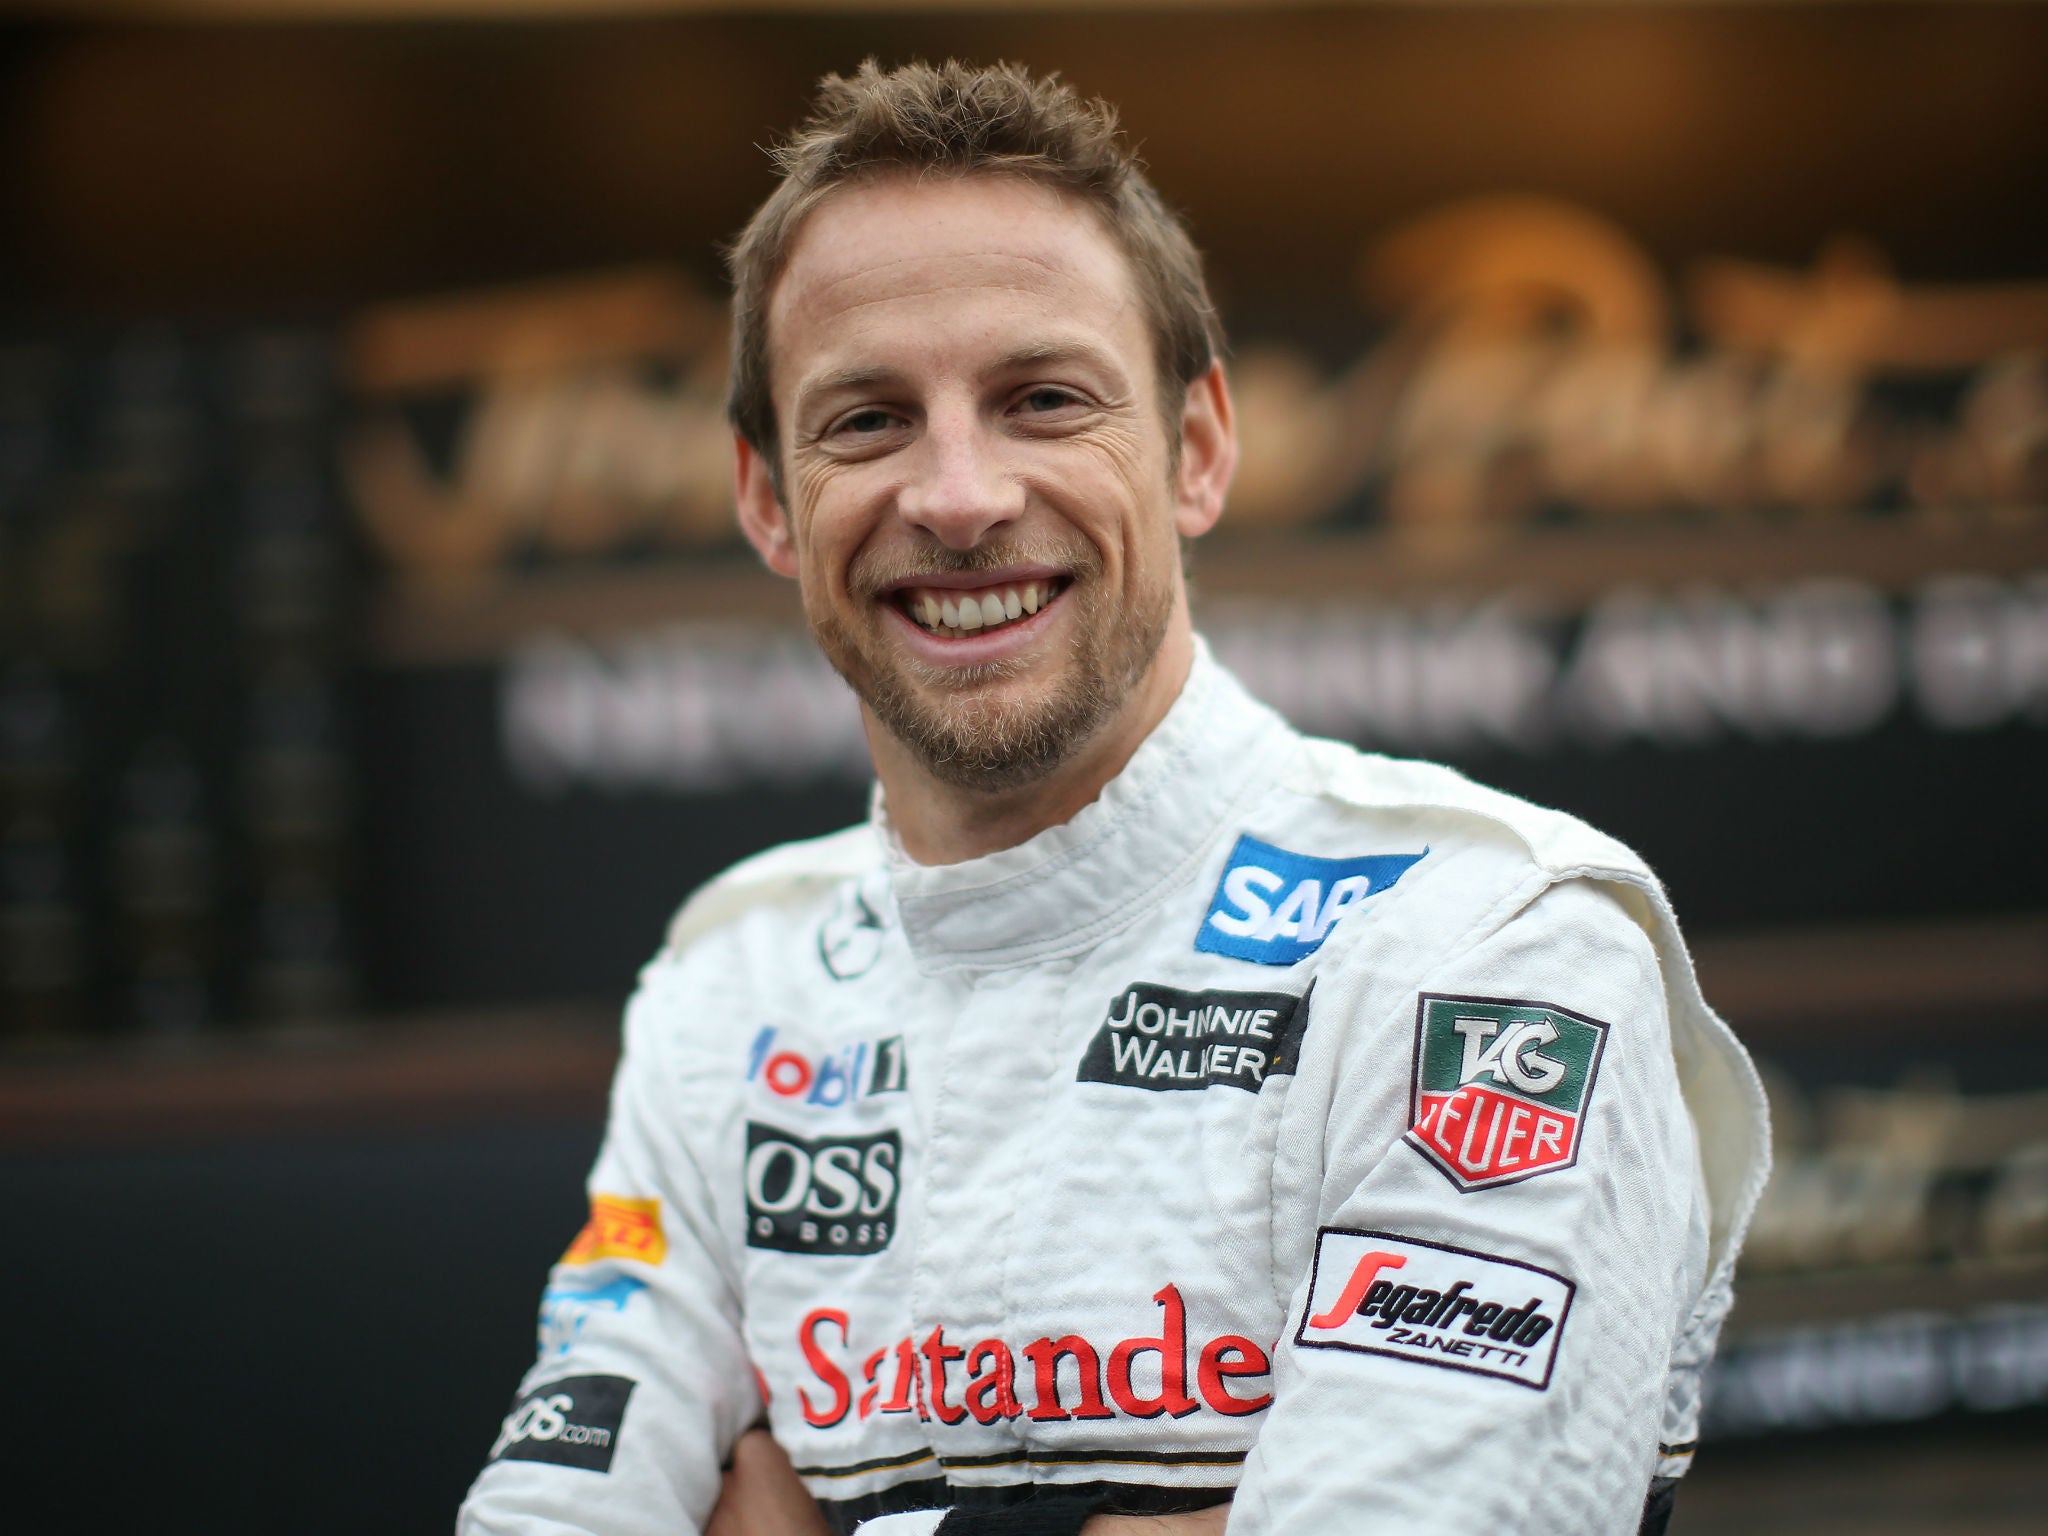 F1 driver Jenson Button's 'dry wit' went down a storm with Top Gear viewers